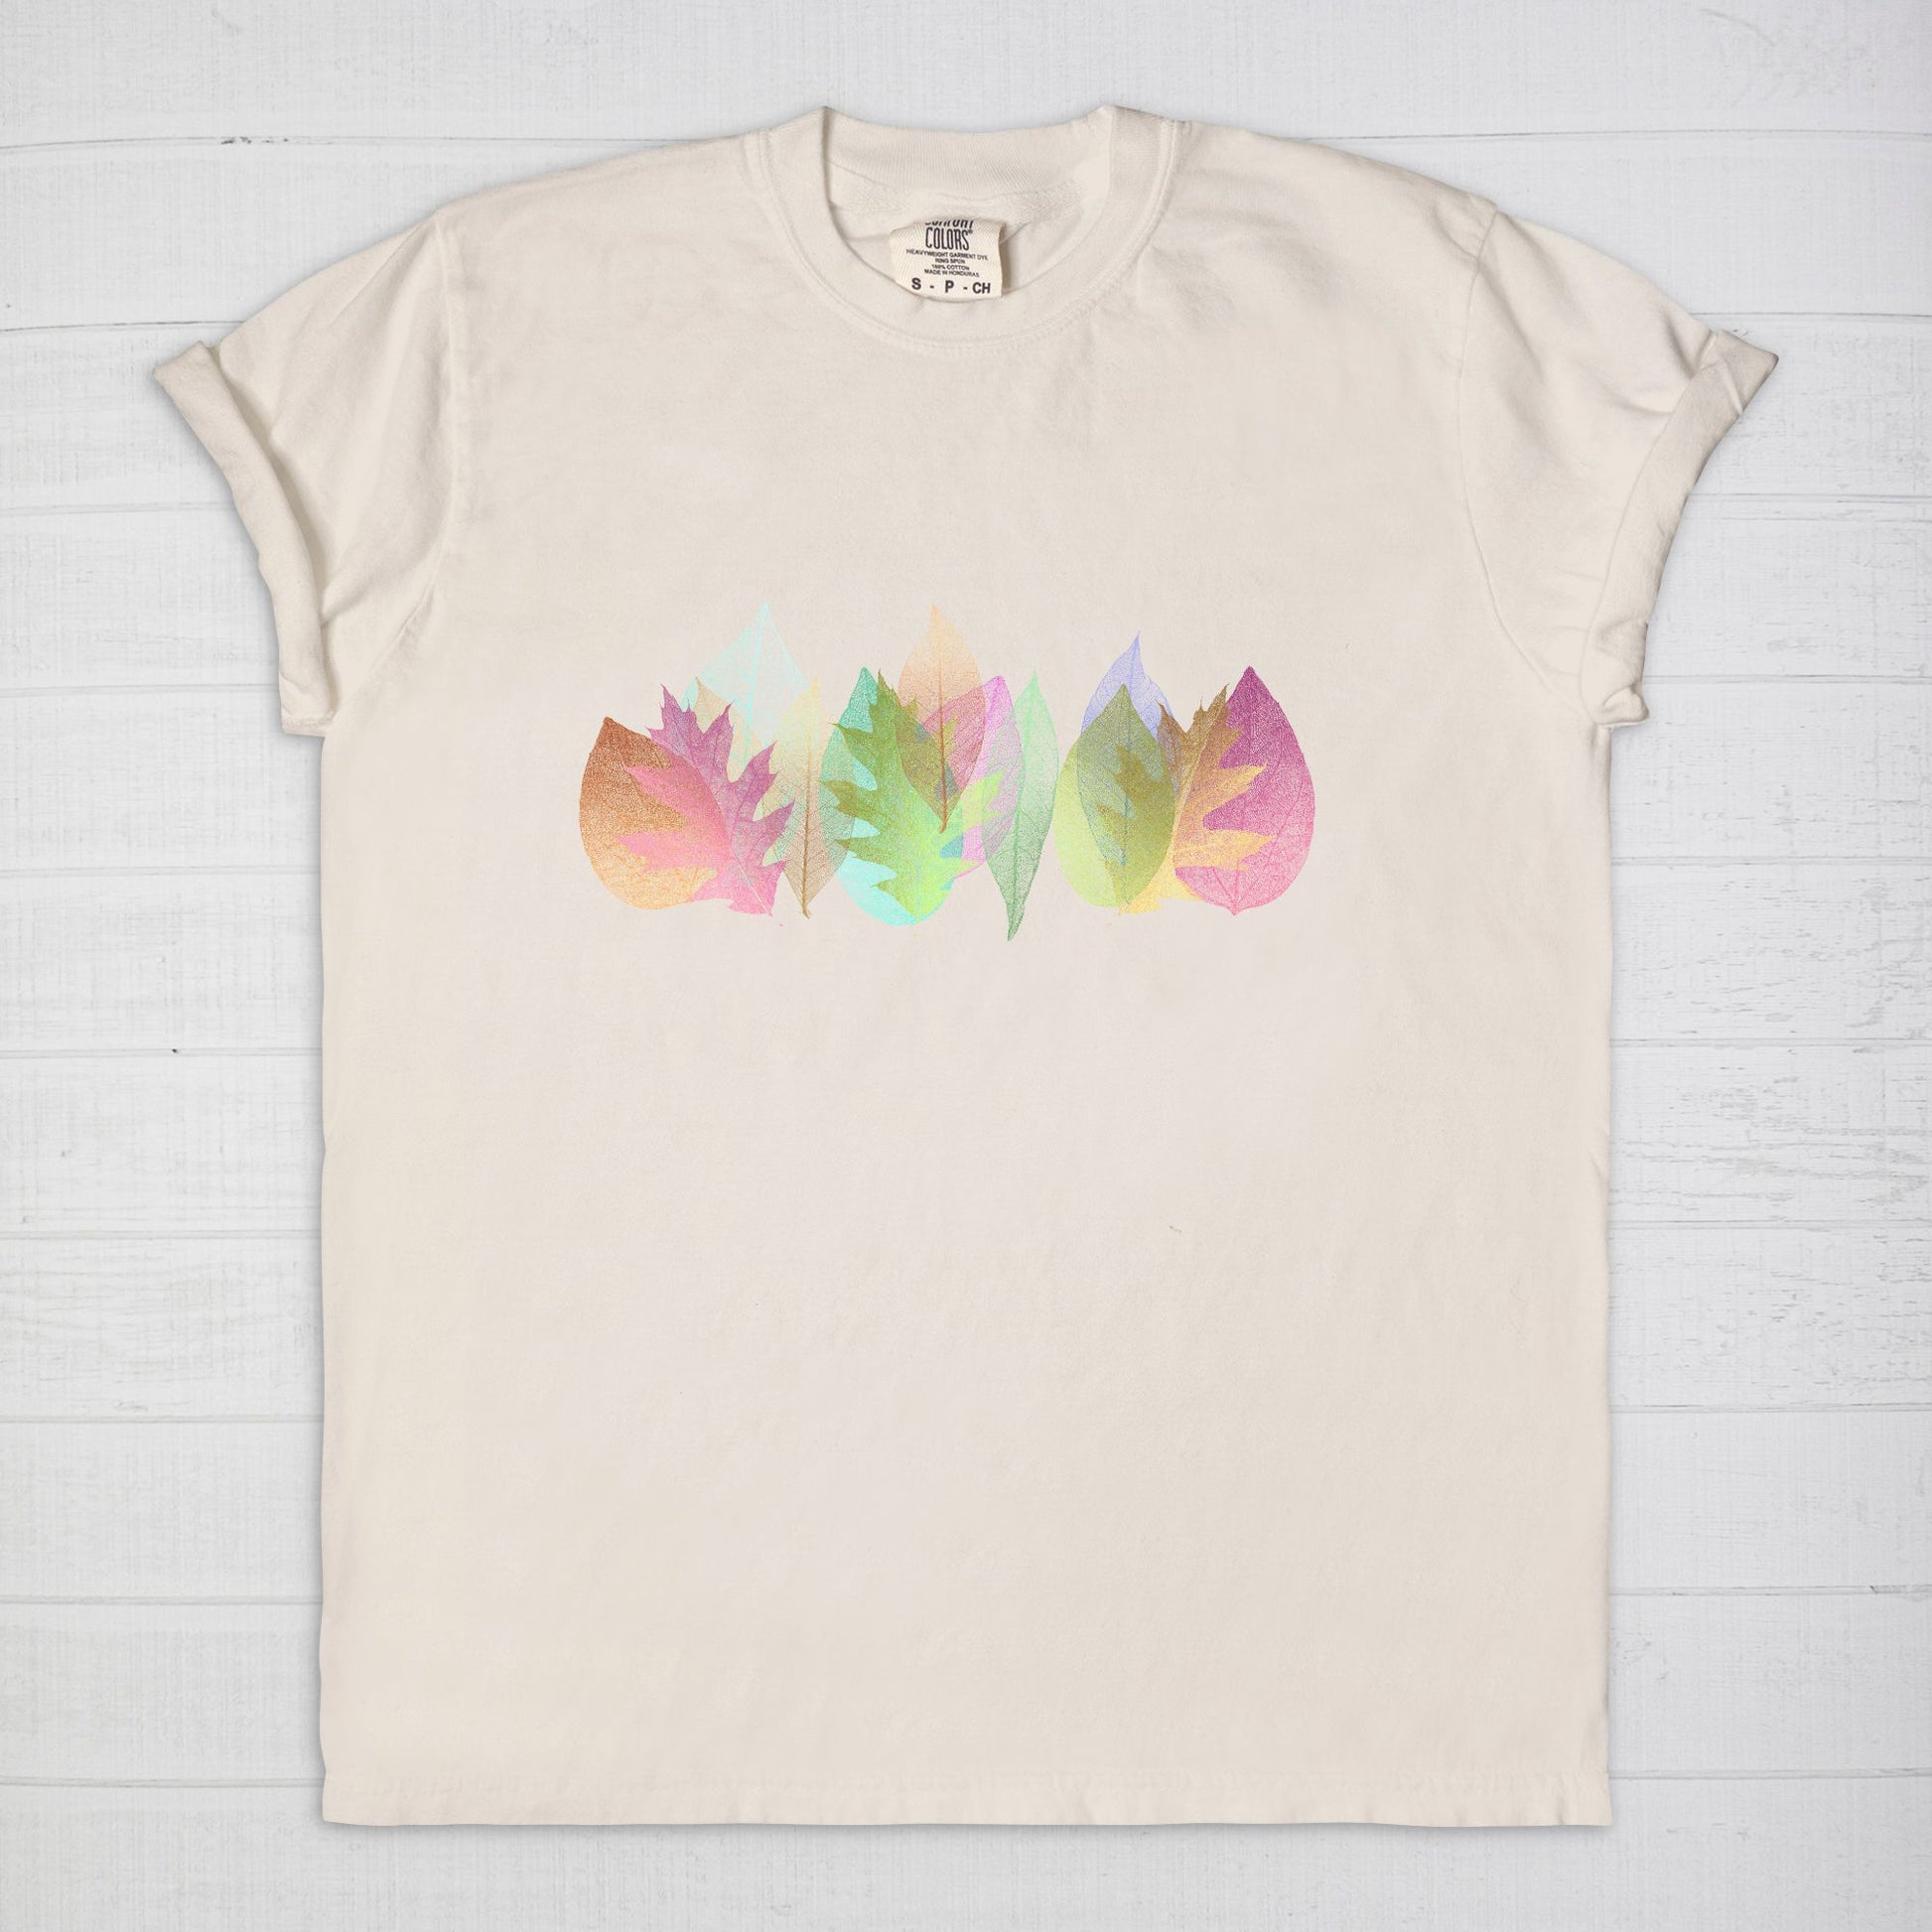 Happy Leaves Tee Shirt by Sorcery Soap + Hocus Pocus Craft